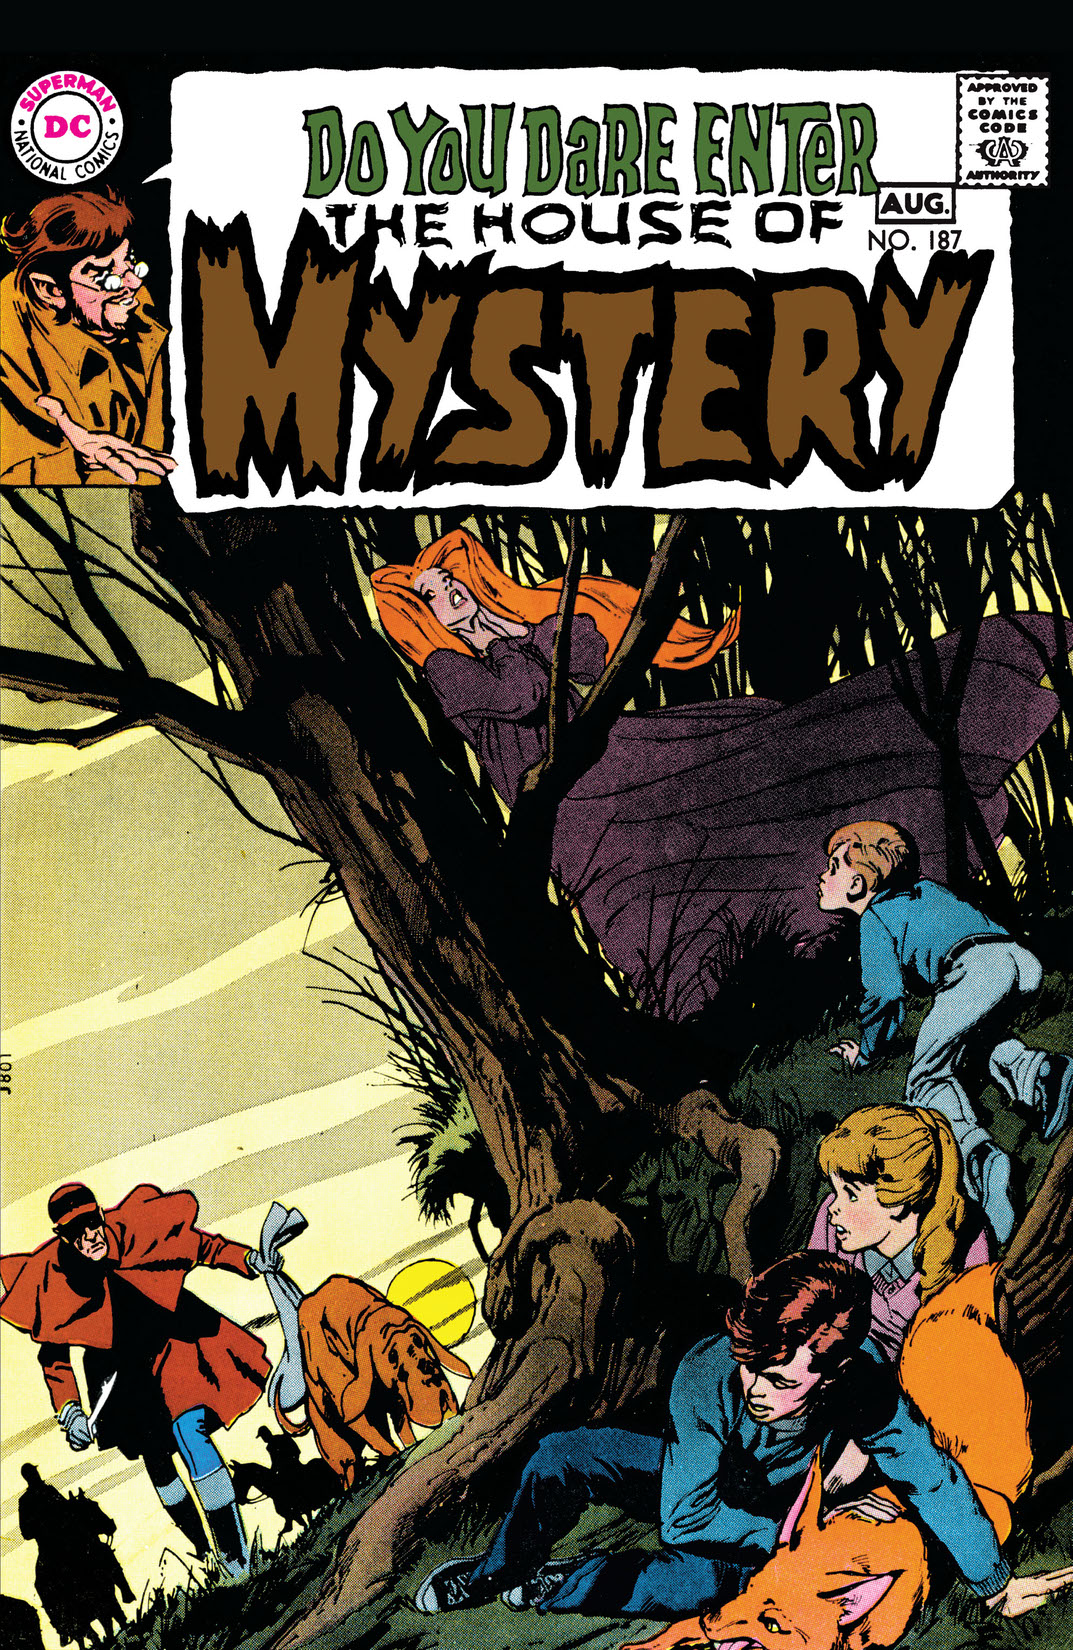 House of Mystery (1951-) #187 preview images